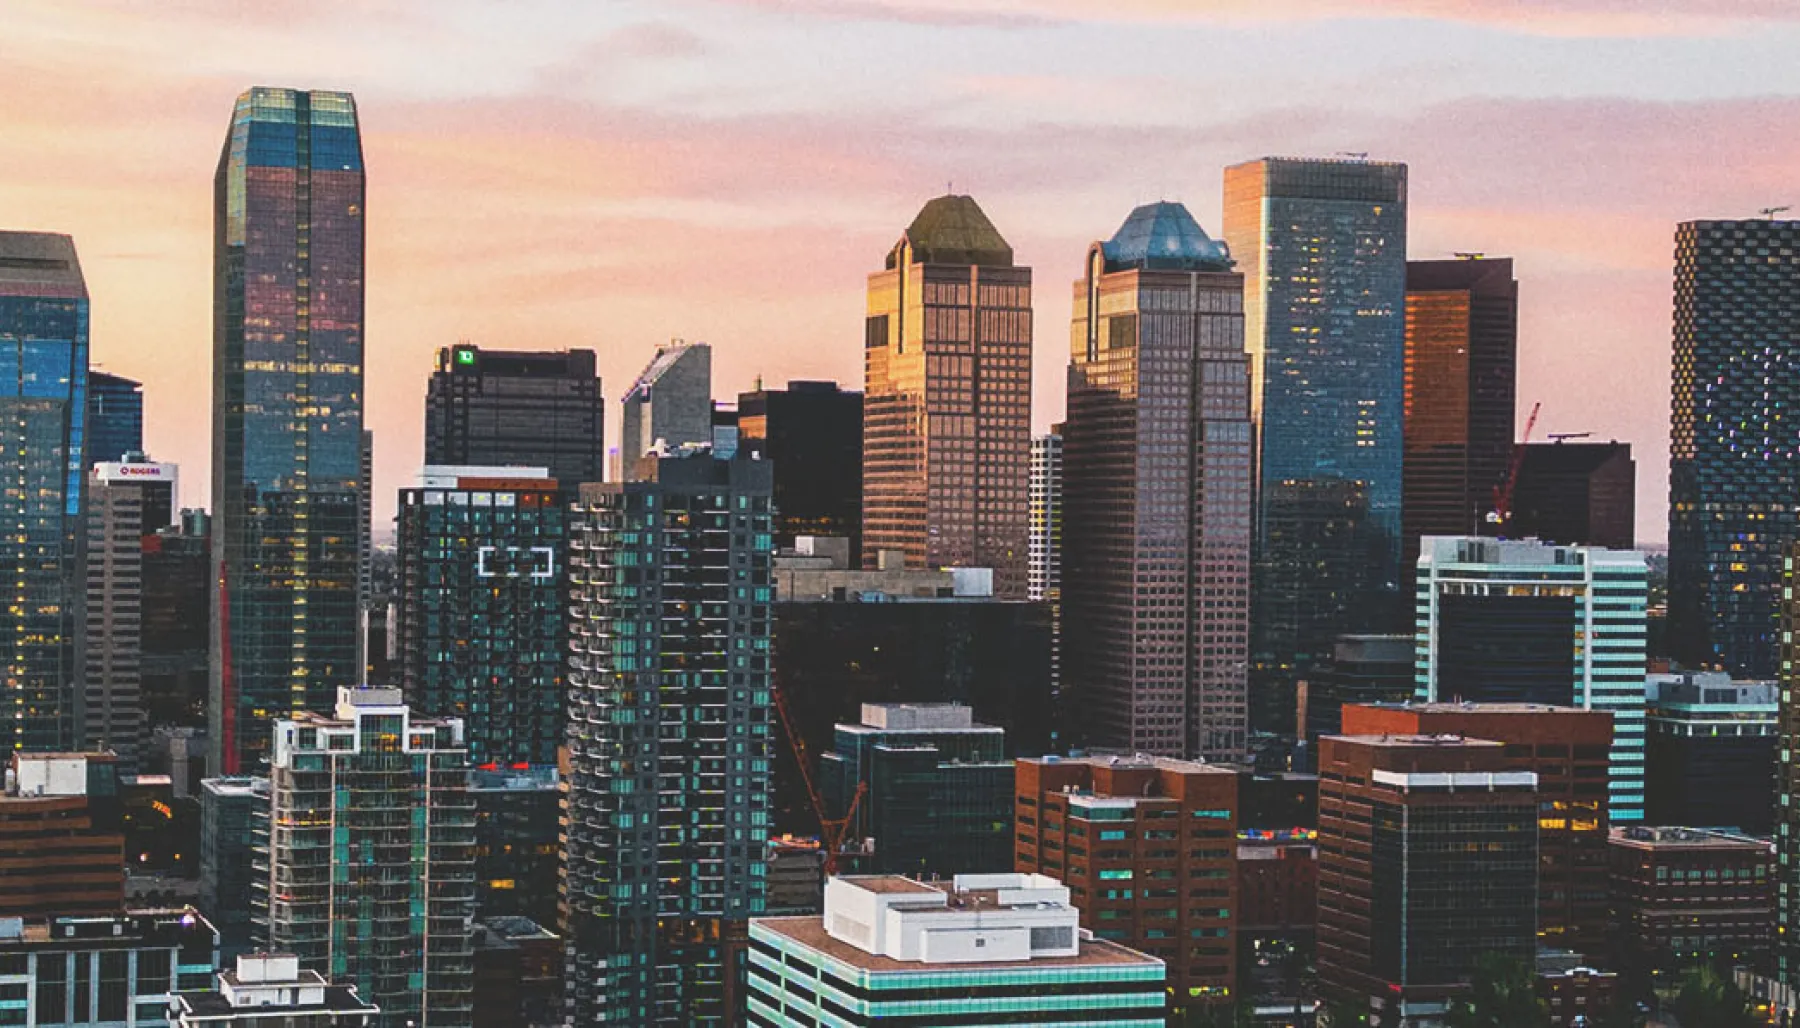 downtown Calgary skyline during a cotton candy sunset